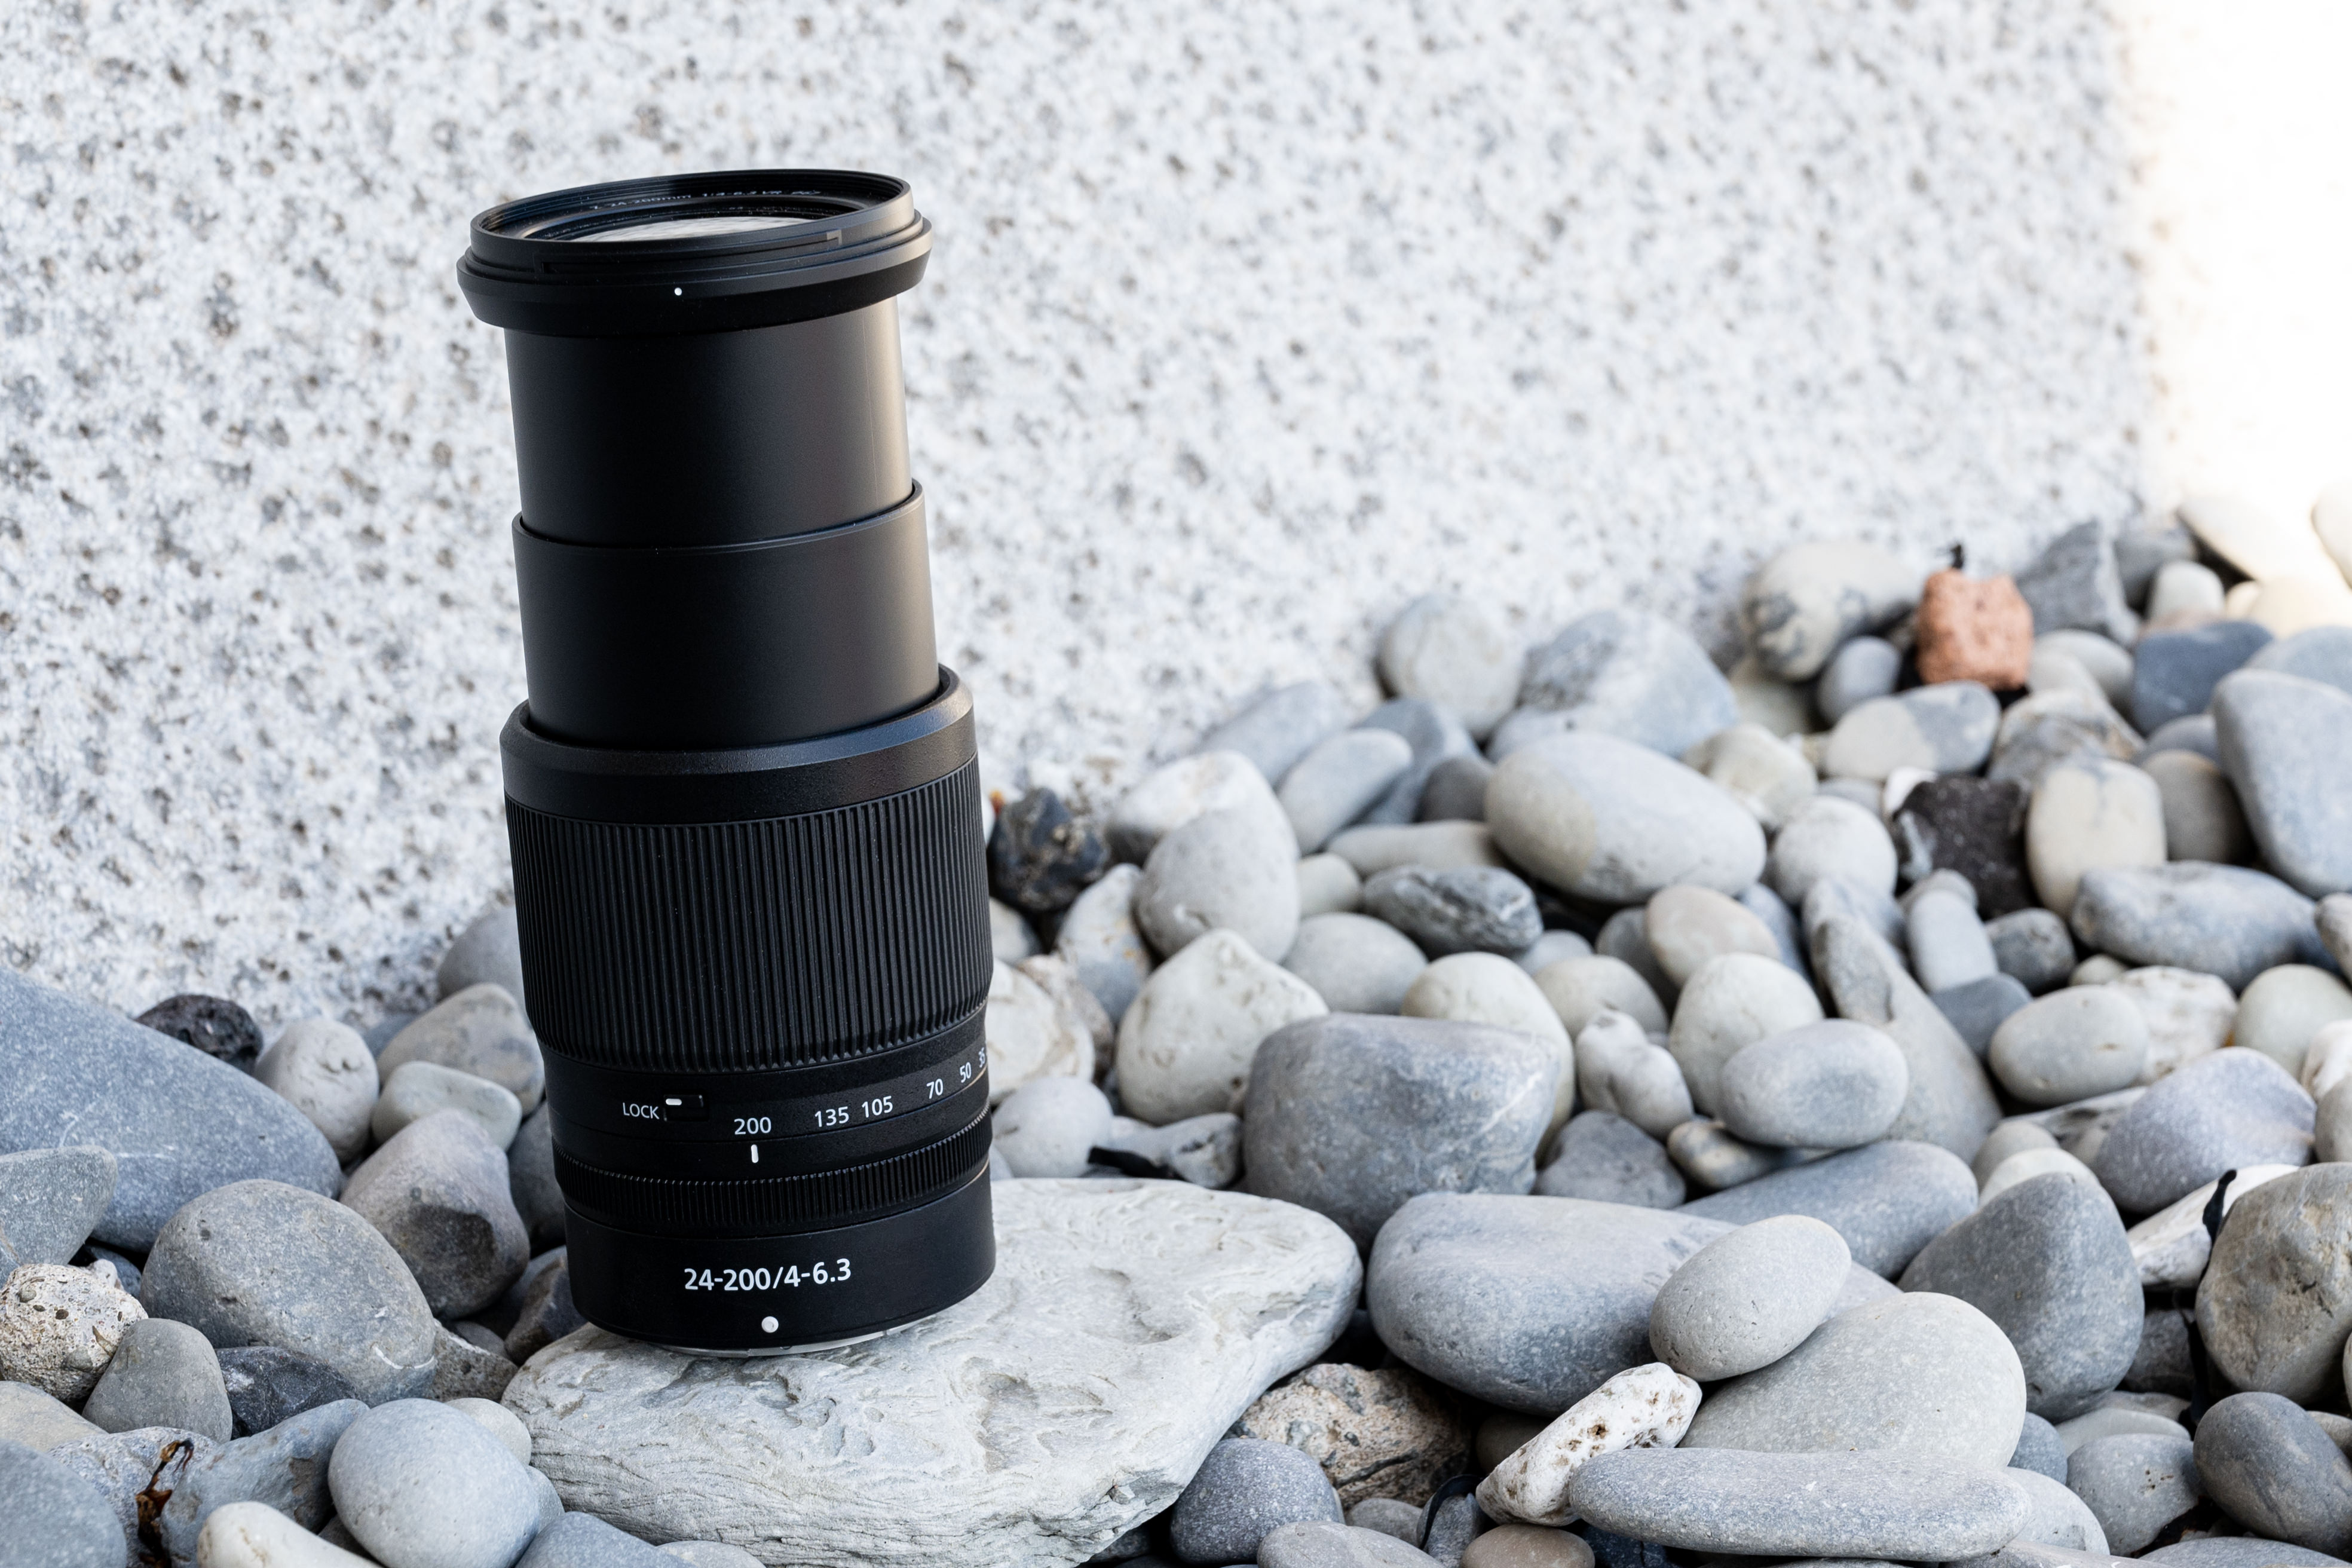 Nikon Z5 + 24-200mm Owner Review / Thoughts (Great Camera) 